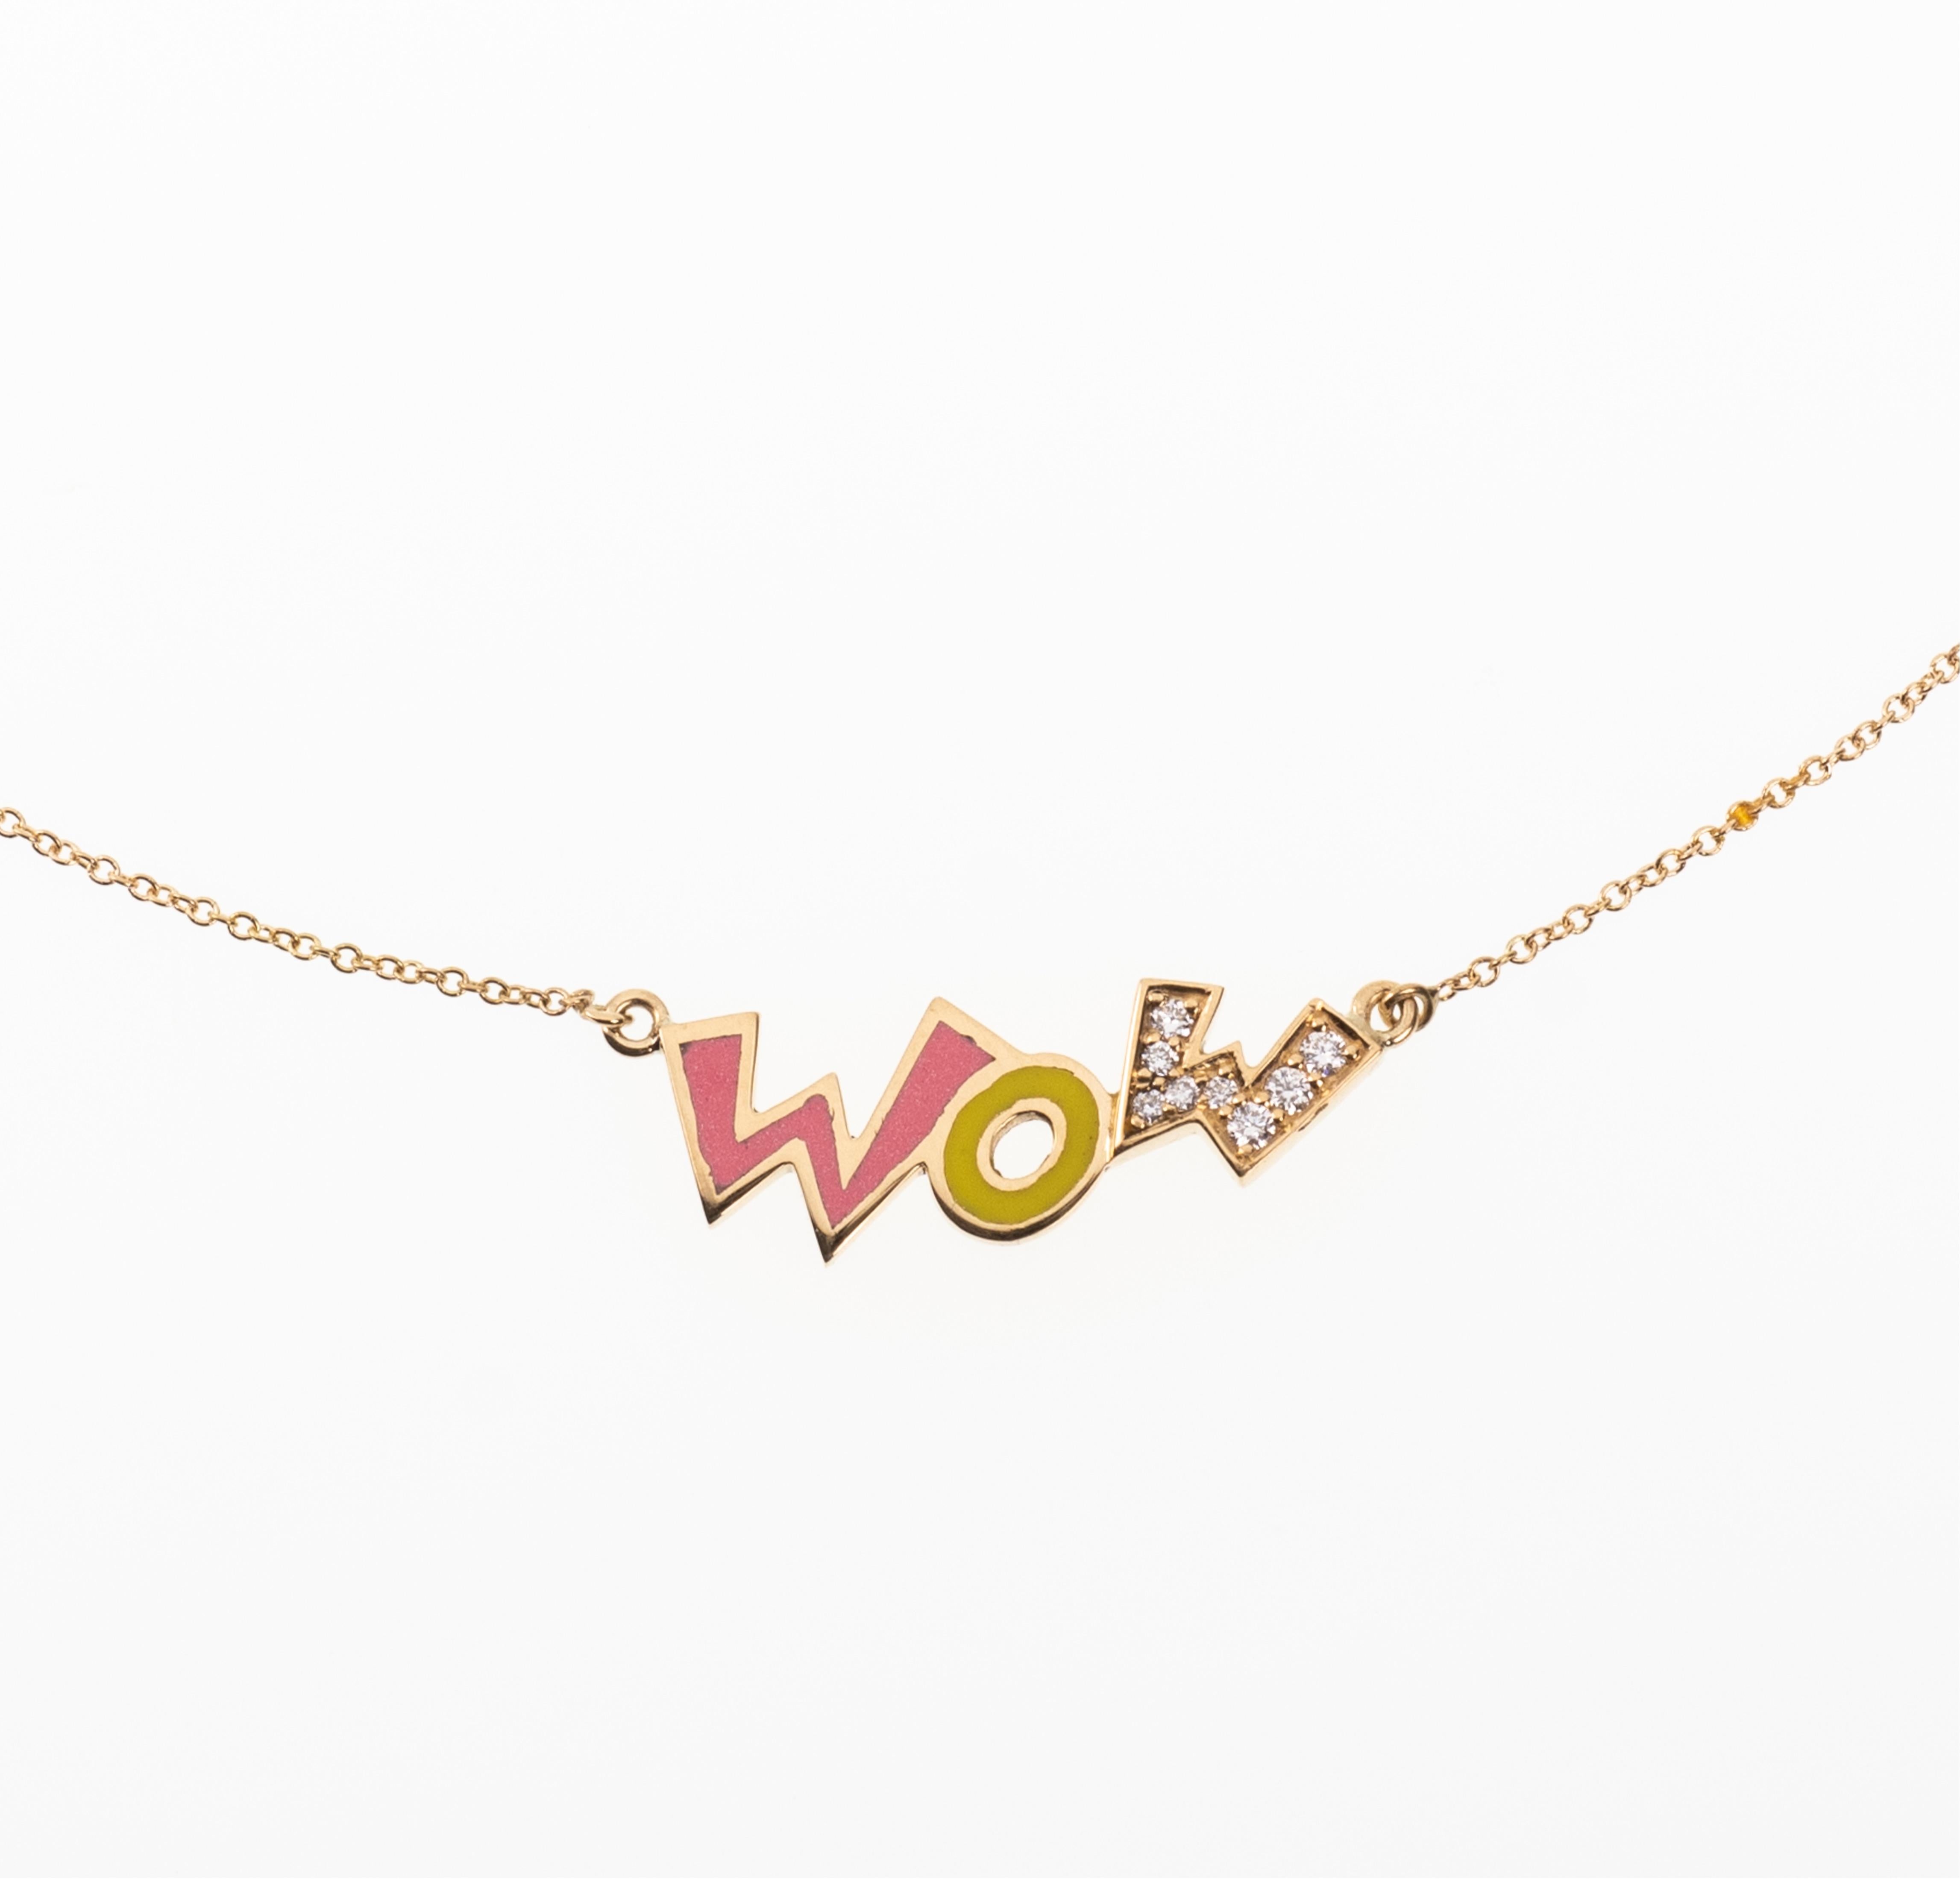 The Wow, necklace is crafted in 18K yellow gold, hallmarked in Cyprus. This fun and colourful pendant, necklace comes in a highly polished finish featuring pink and yellow enamel and white Diamonds totaling 0.1 Cts. Light and comfortable, it’s